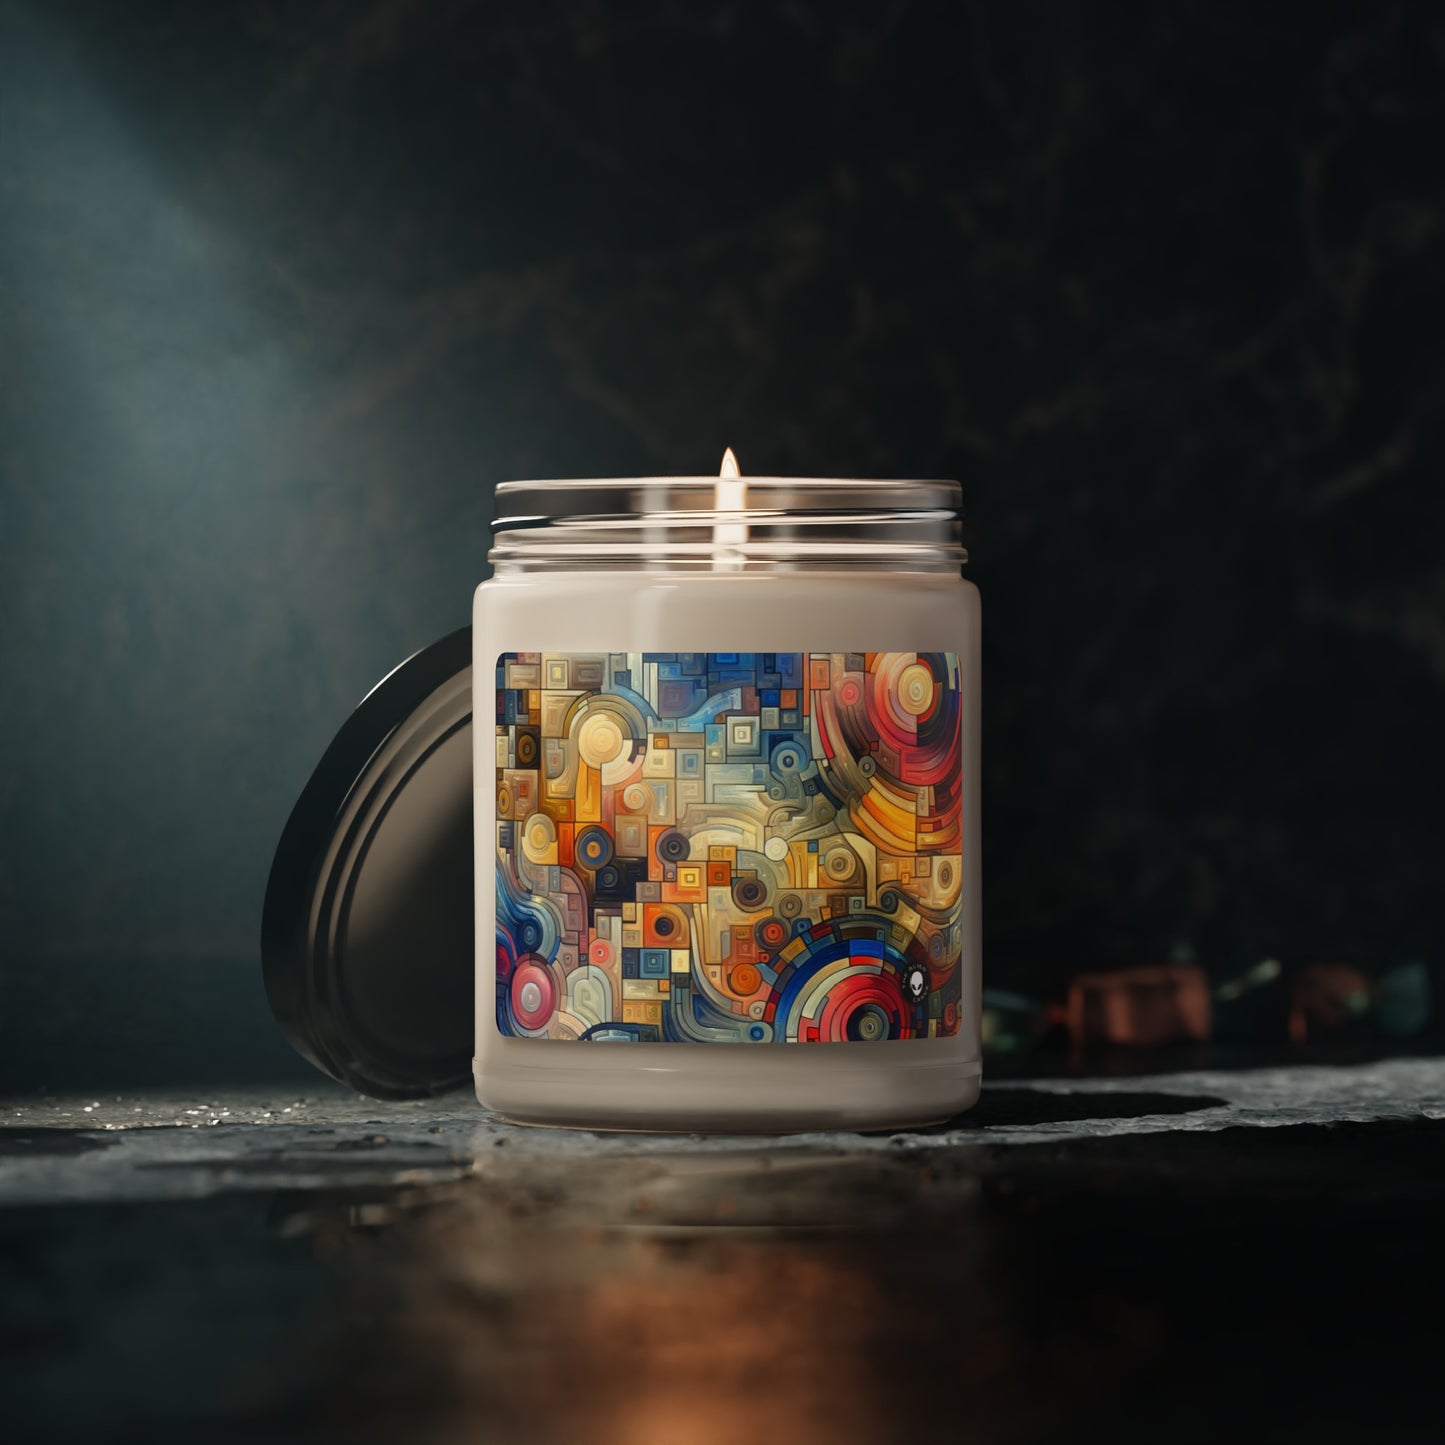 "Night City Rhythms: An Abstract Urban Exploration" - The Alien Scented Soy Candle 9oz Abstract Art